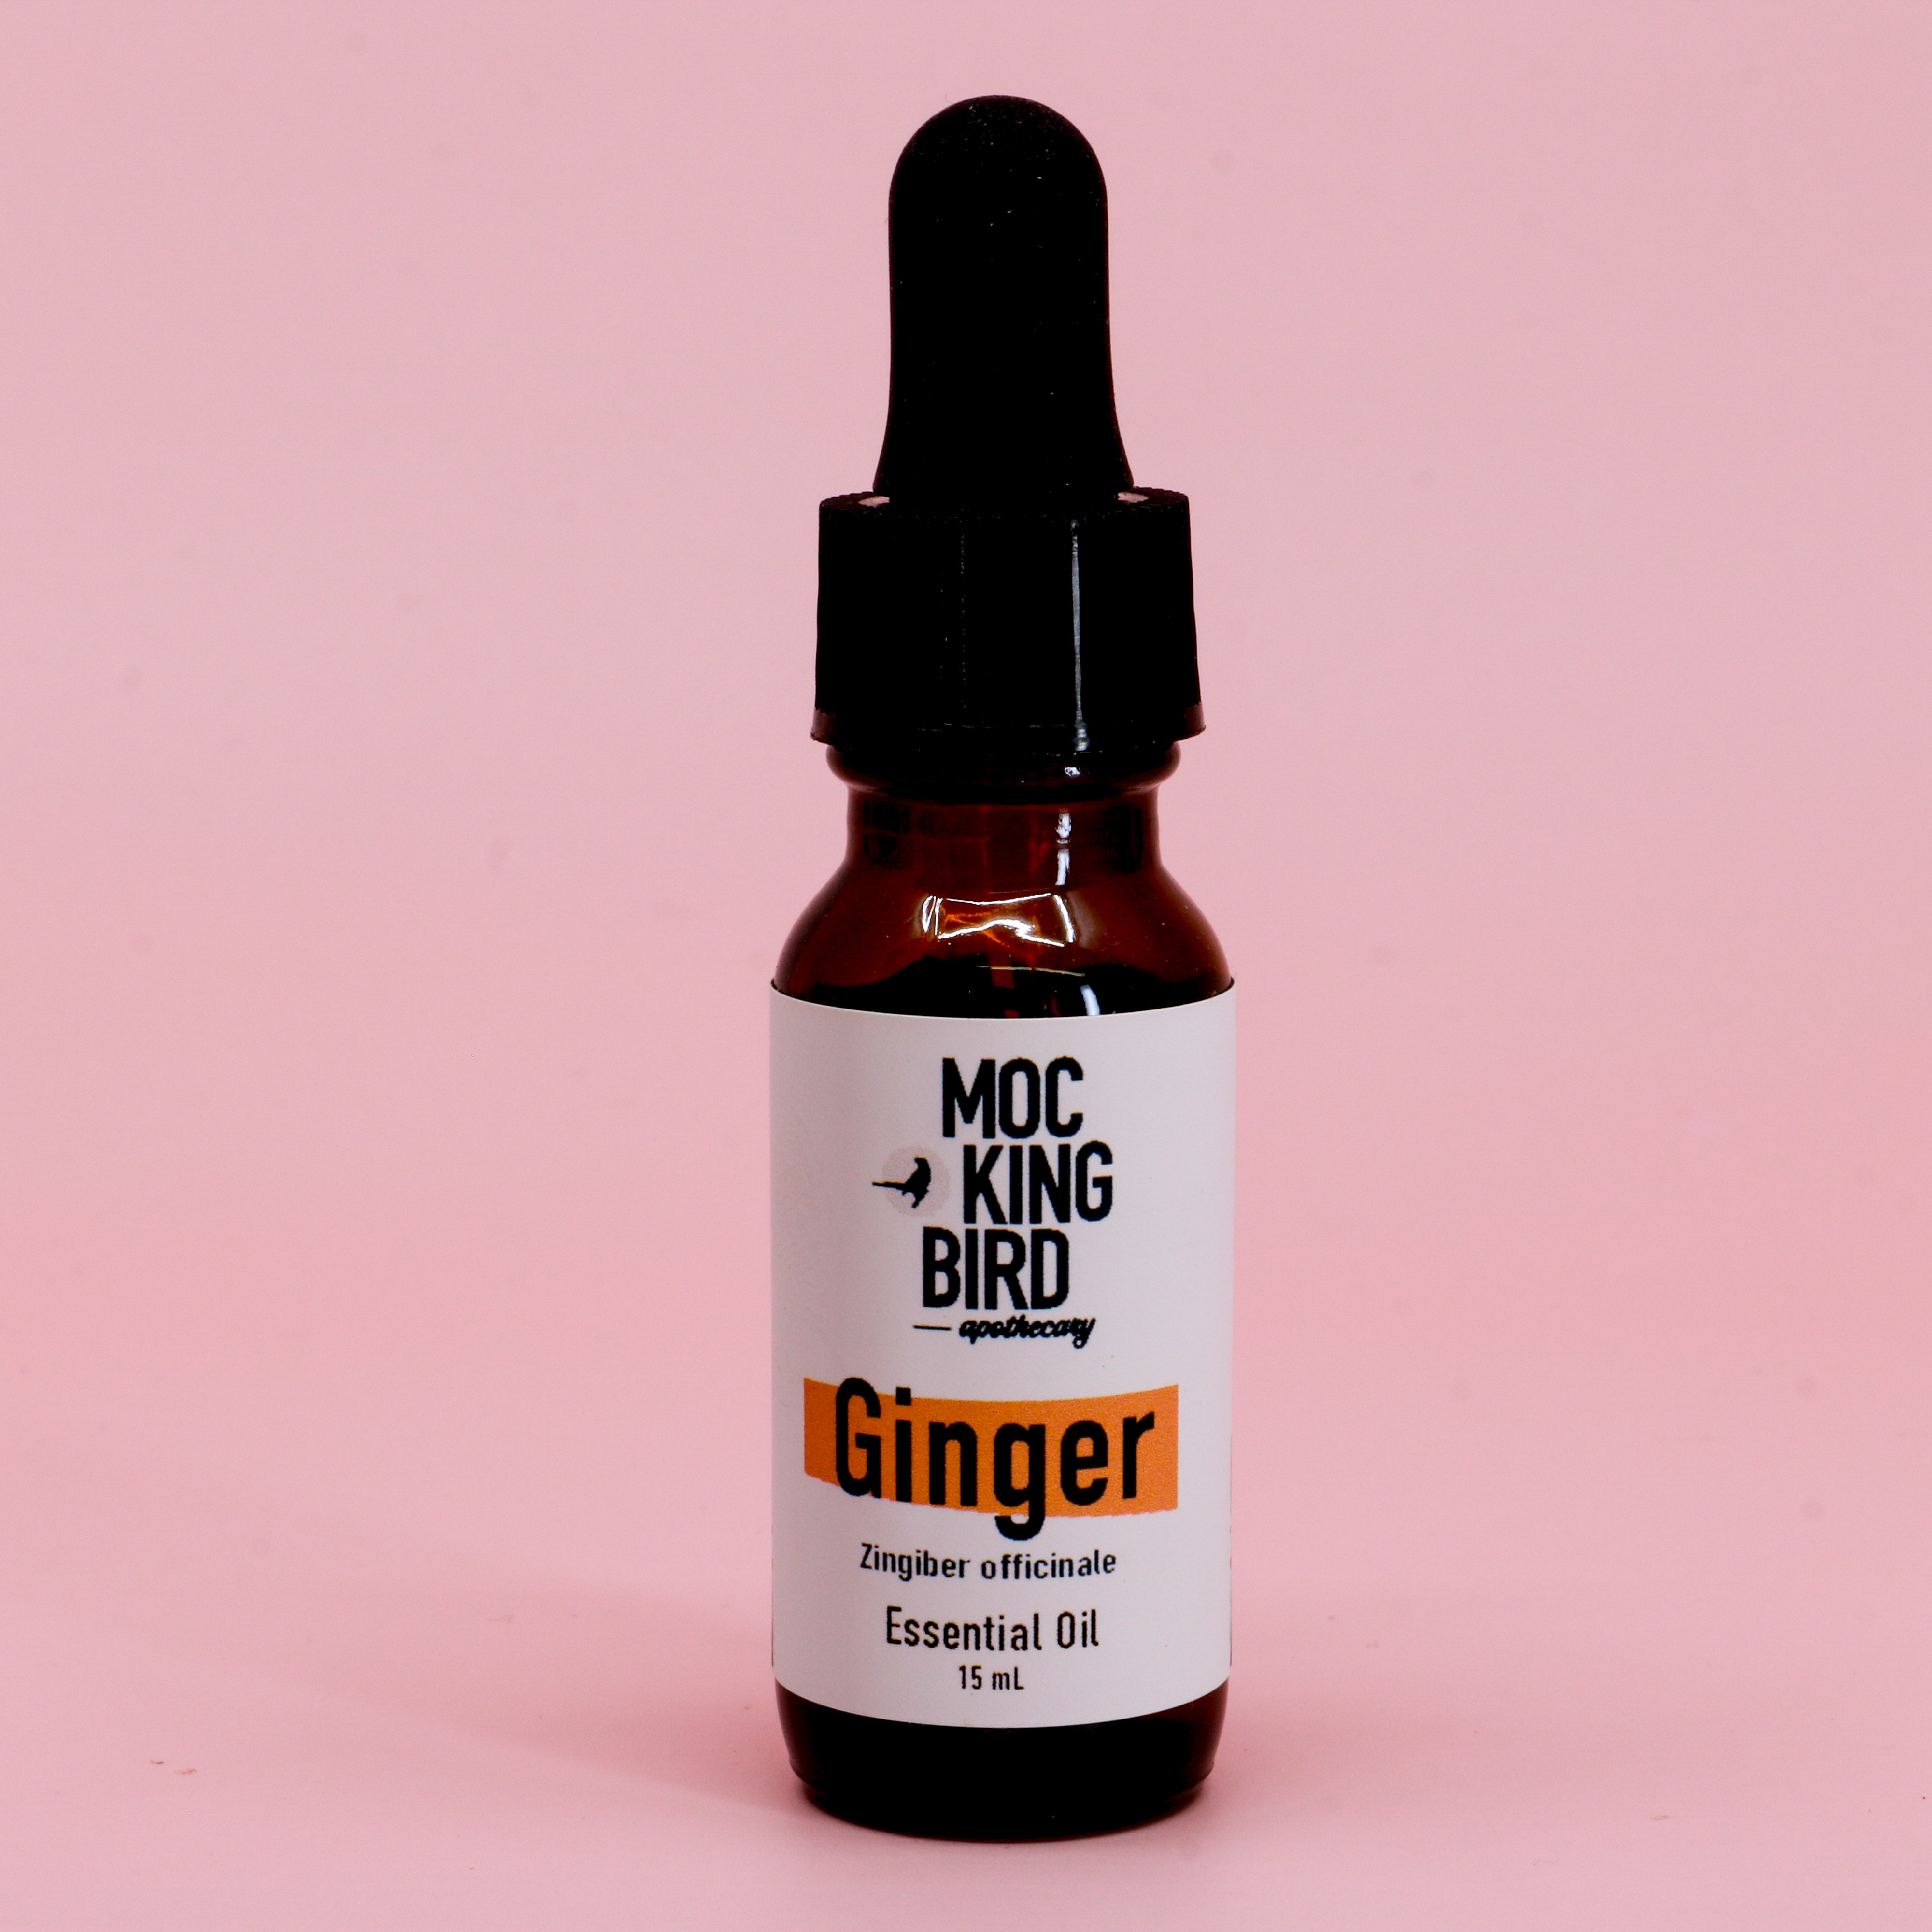 Ginger Essential Oil (Zingiber officinale) - The Mockingbird Apothecary & General Store